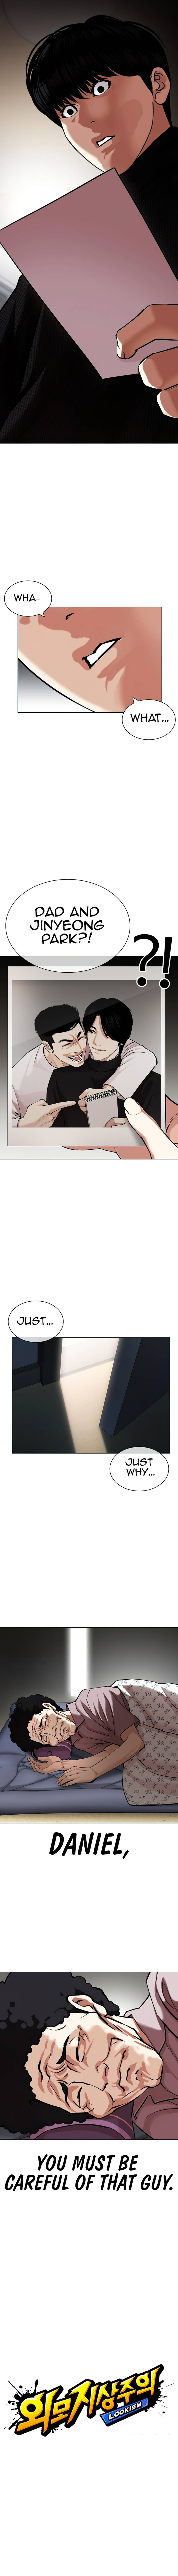 Lookism Chapter 433 image 08